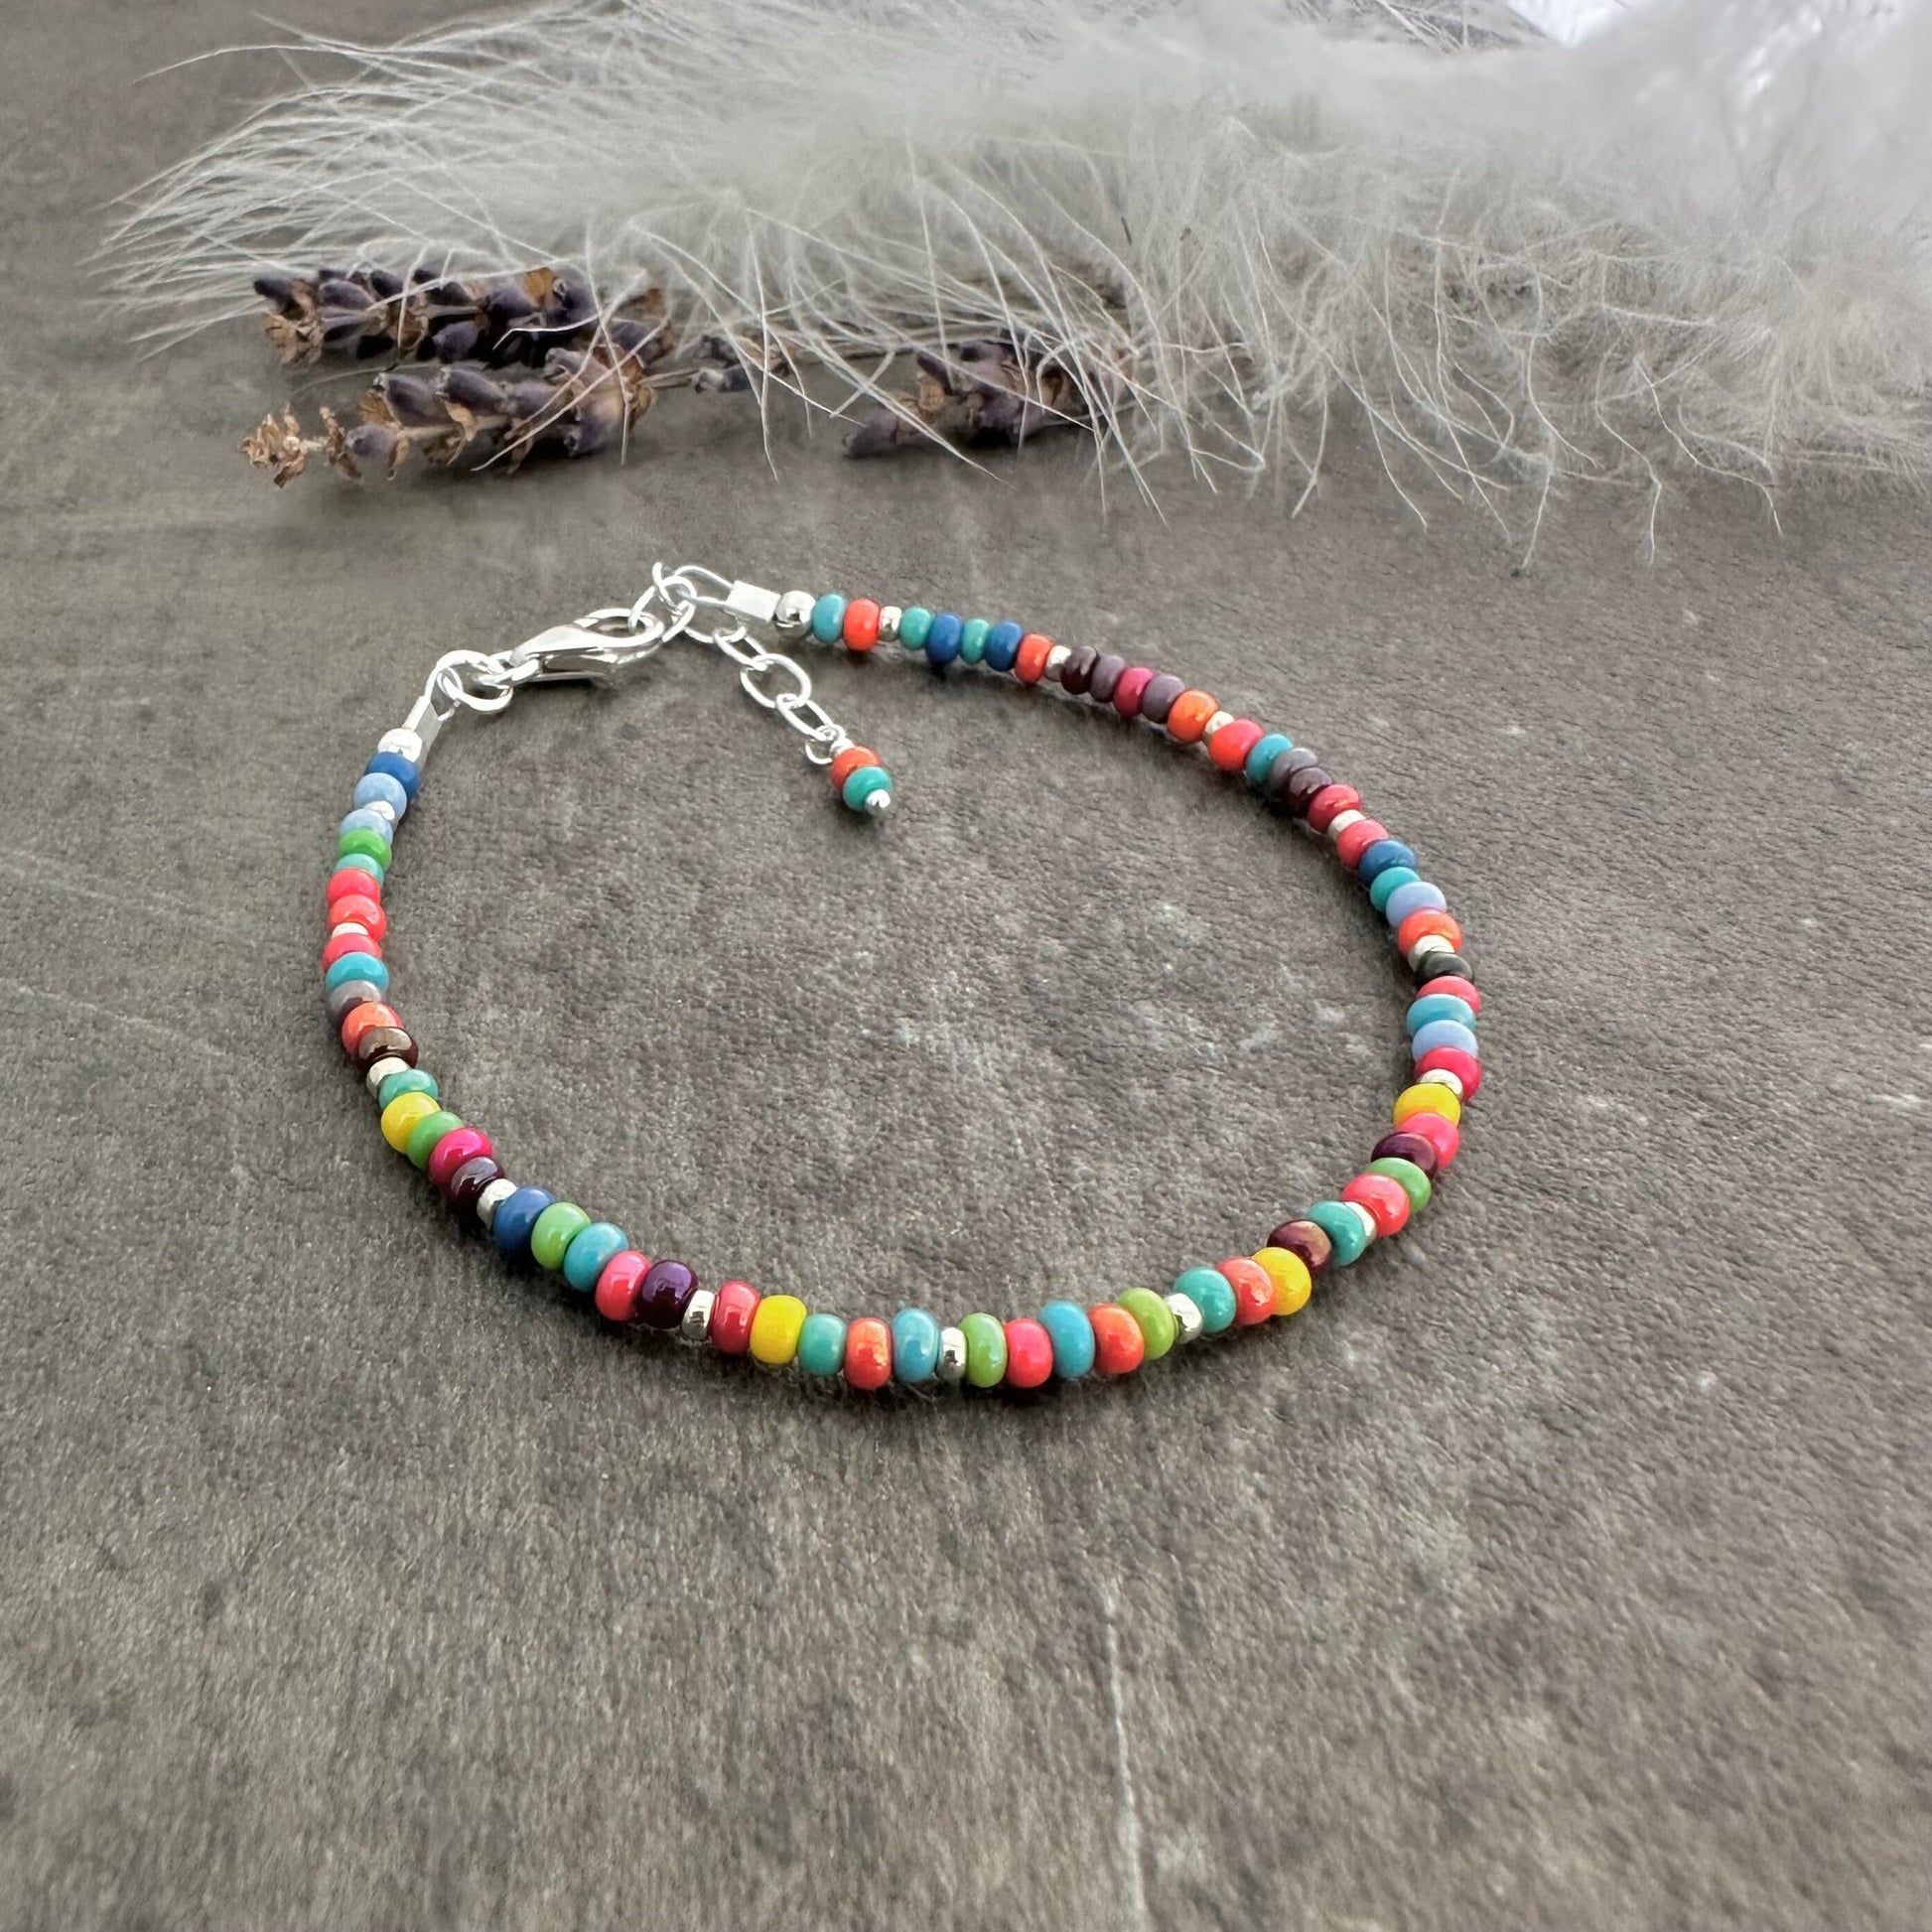 Colourful Summer Beaded Bracelet With Seed Beads Necklace 19